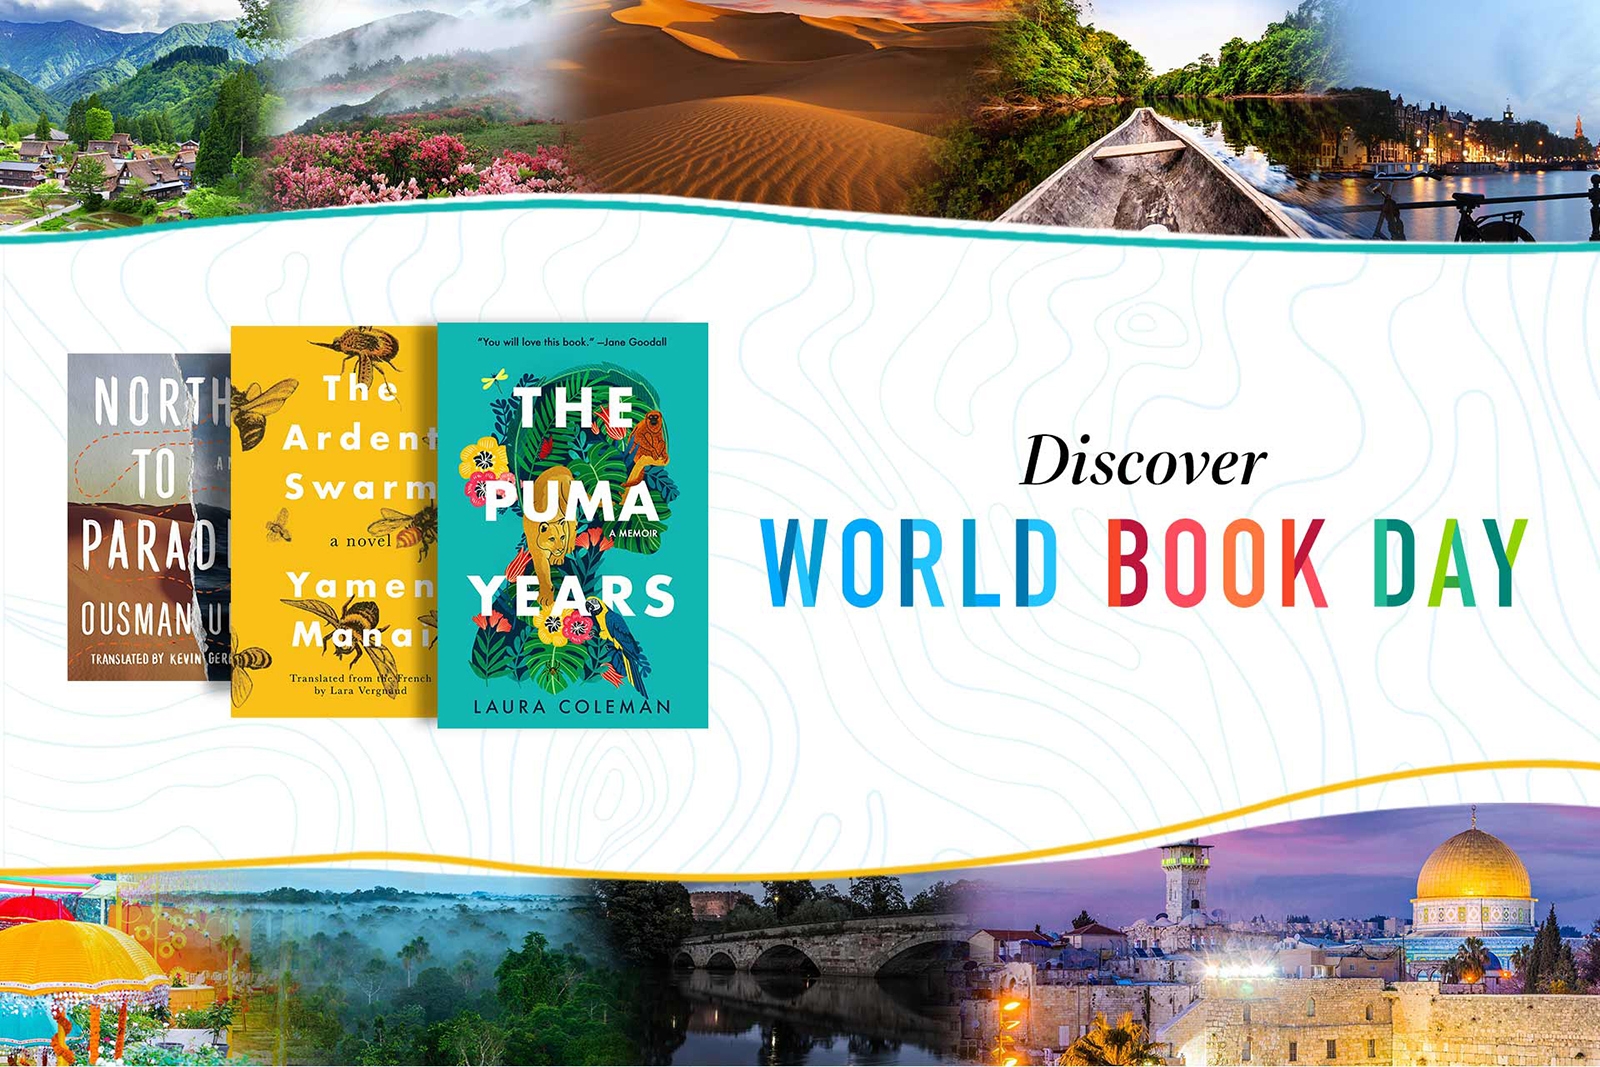 An illustrated image that shows three covers for free books on Amazon on the left hand side. On the right hand side is text that reads "Discover World Book Day Join in, read for free" with the "Amazon Publishing " logo below it.